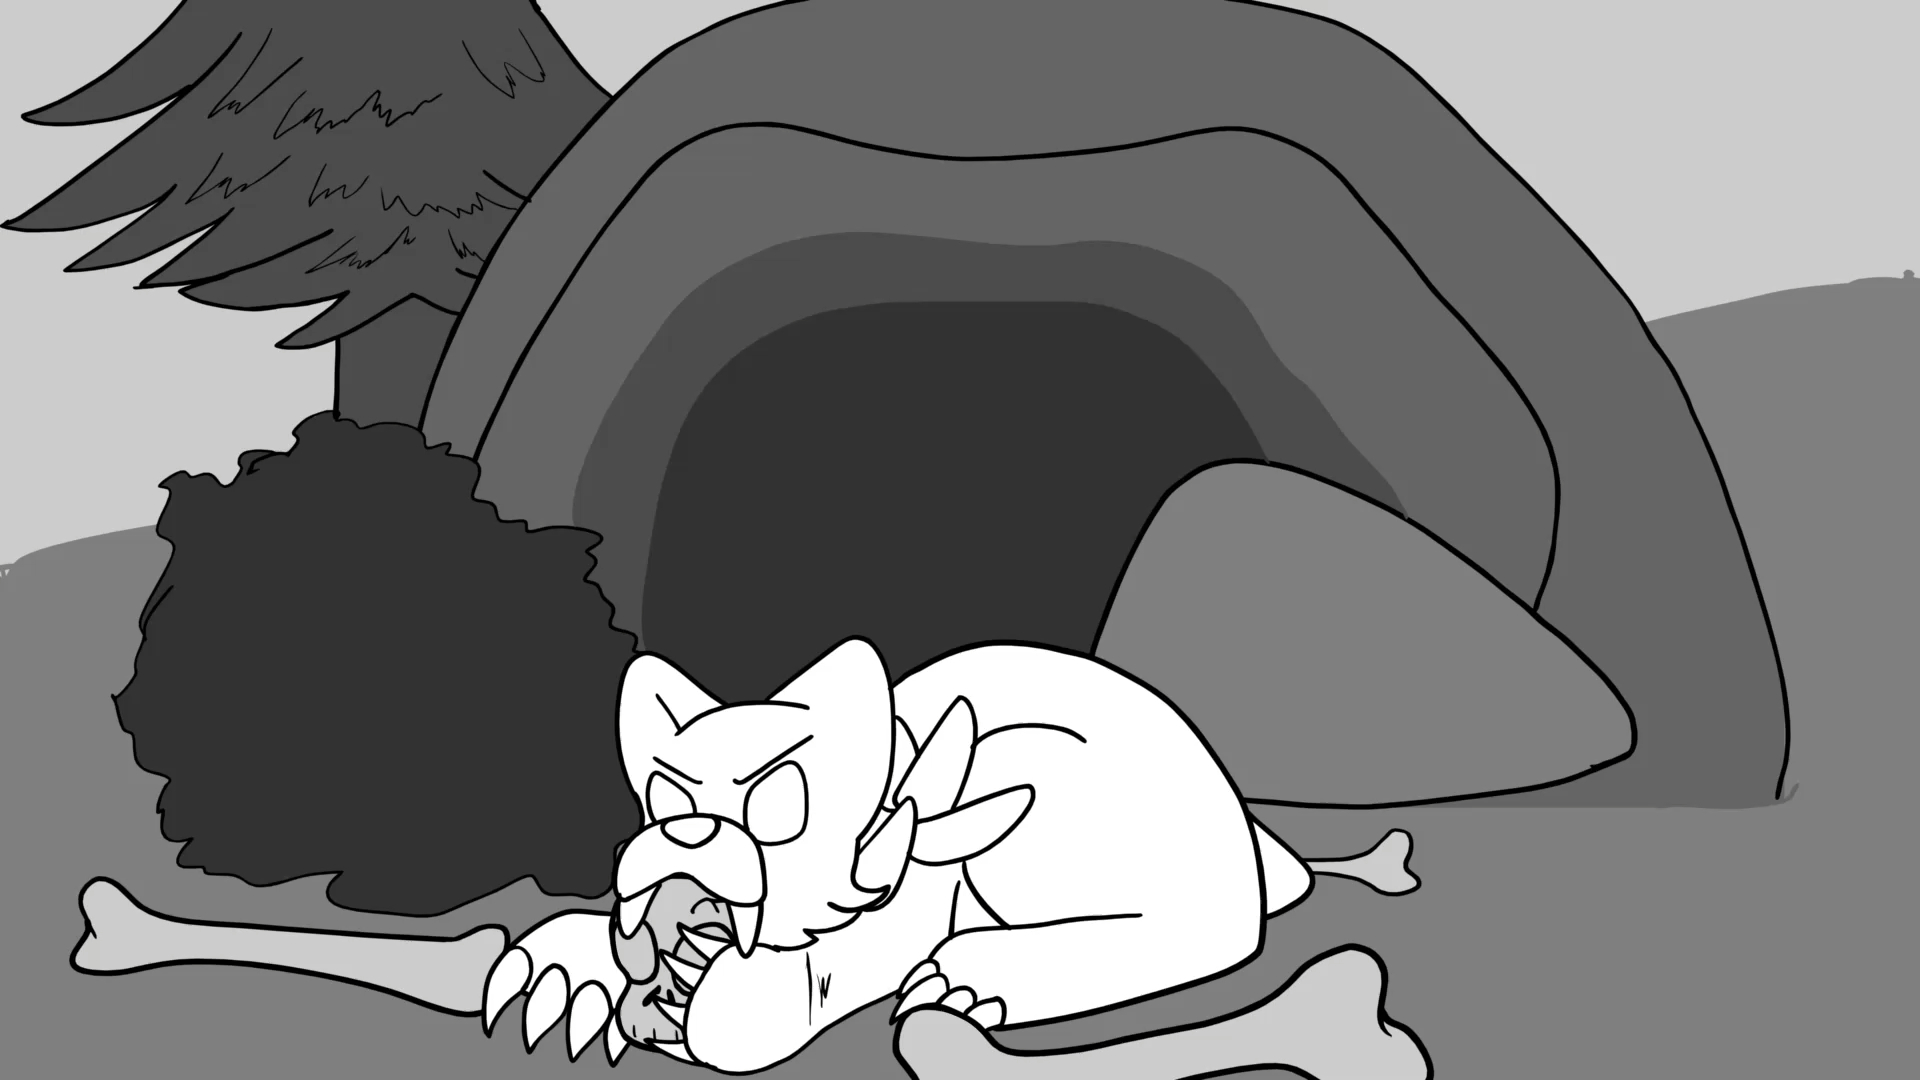 Hunt / Still of Baby Spiky Bear from "Hunt," a 3 minute storyboard/animated short created using Toon Boom, Storyboard Pro, and Clip Studio Paint.